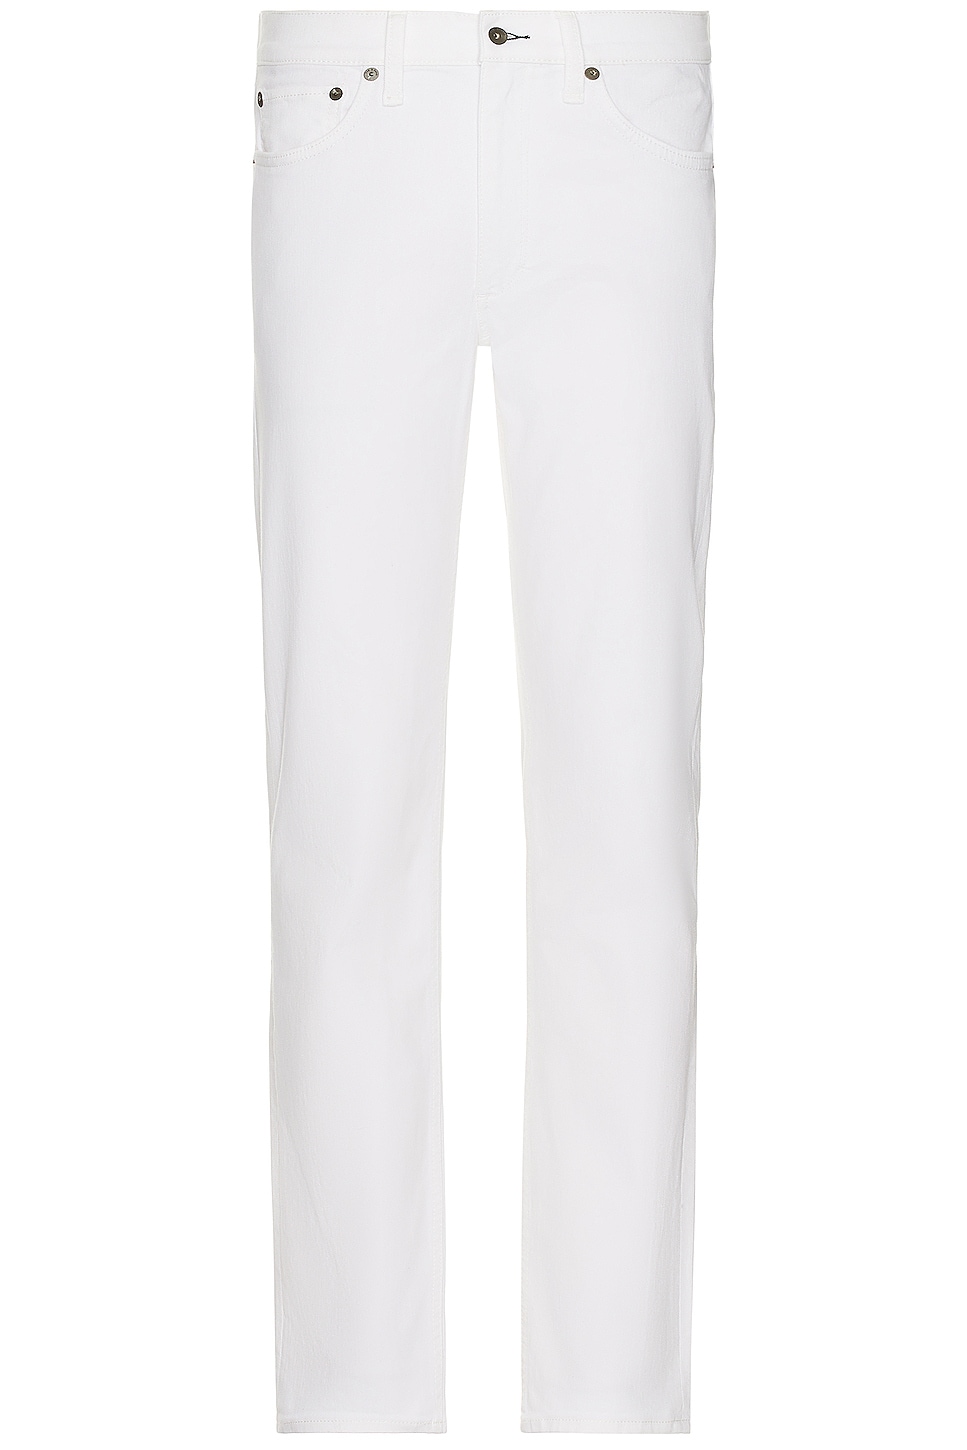 Image 1 of Rag & Bone Fit 2 Authentic Stretch Pant in Optic White